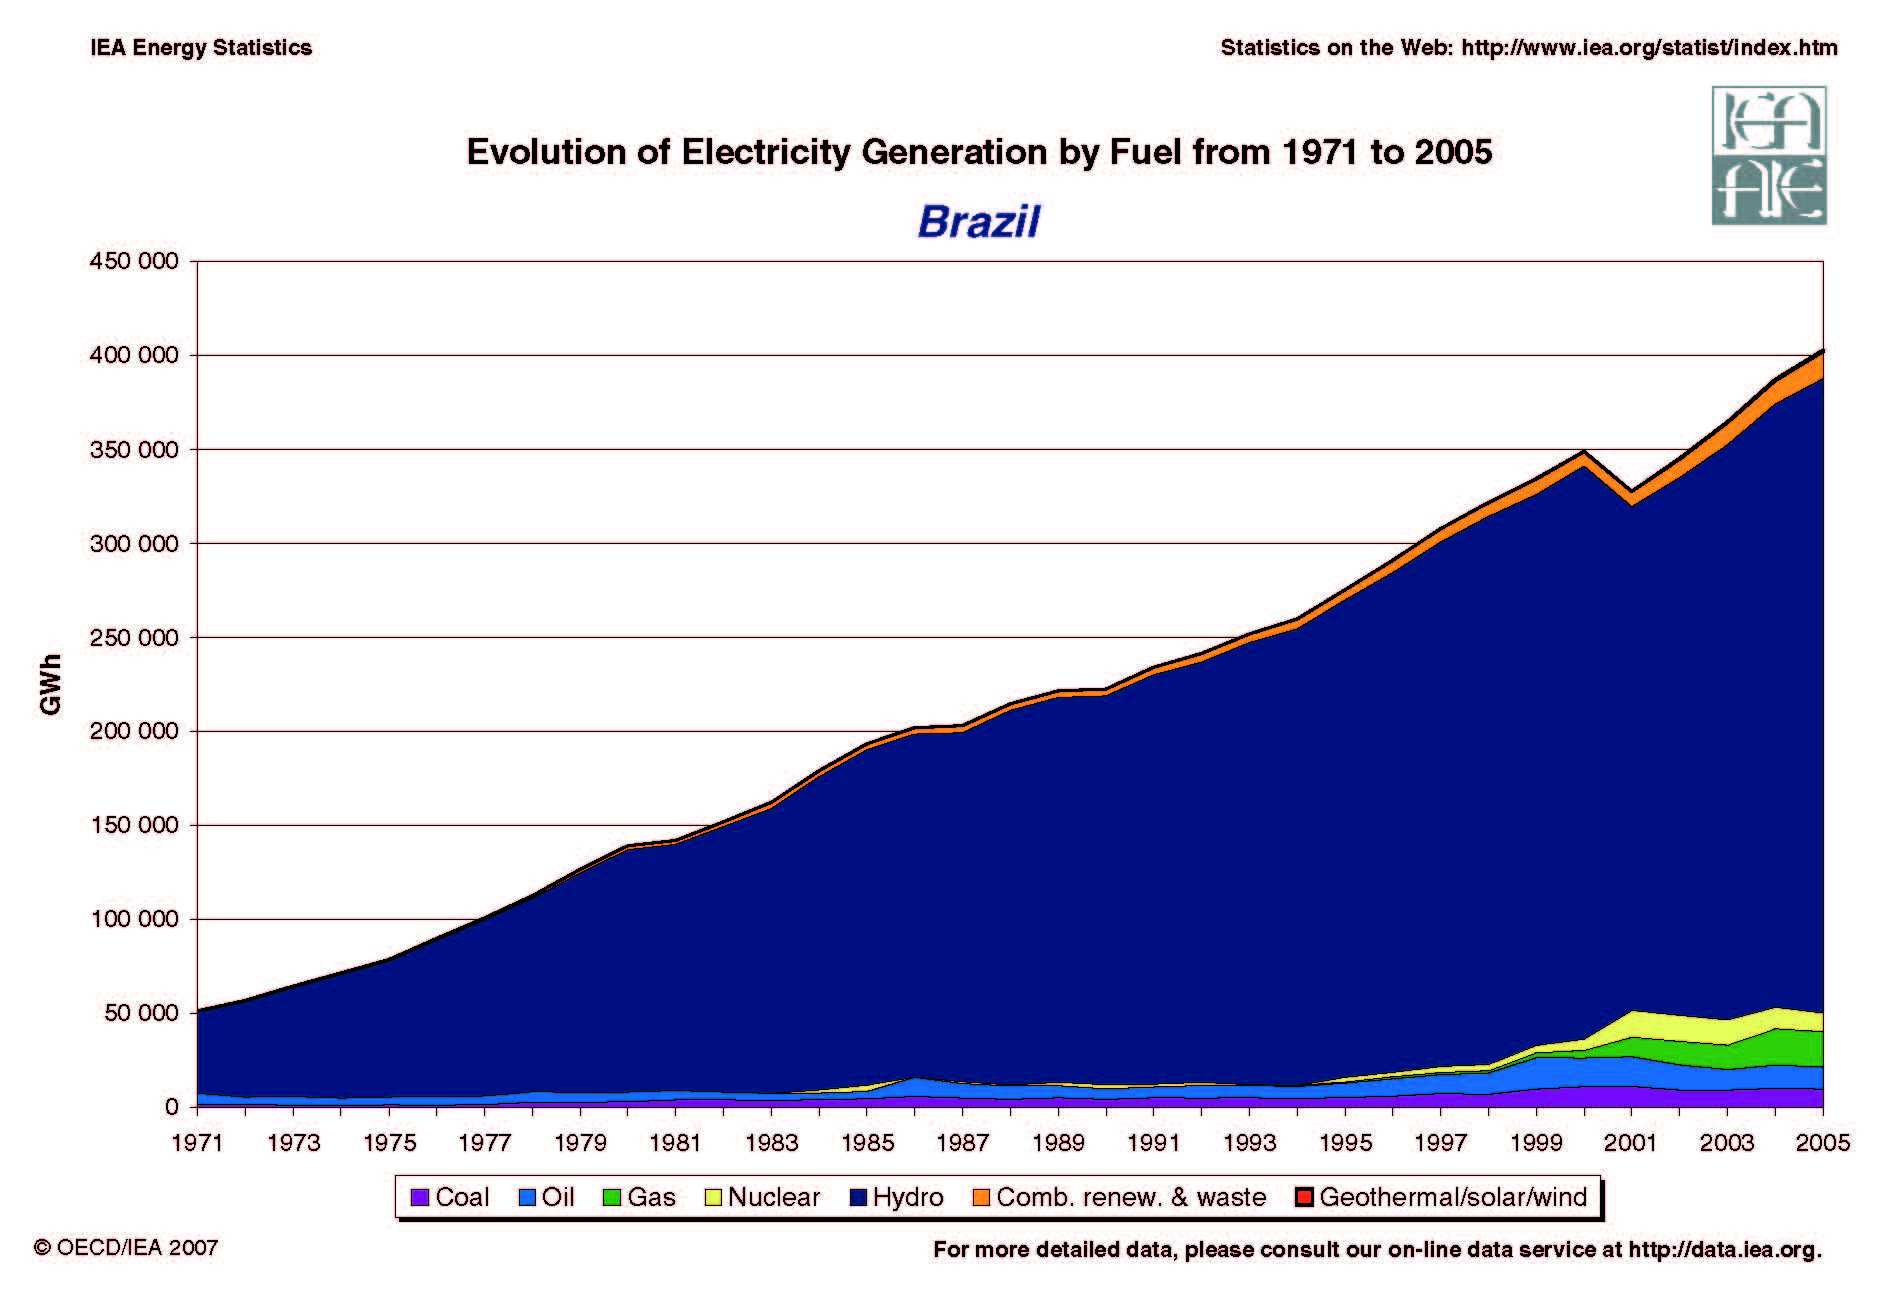 Brazil Evolution of Electricity Generation by Fuel 1971 - 2005